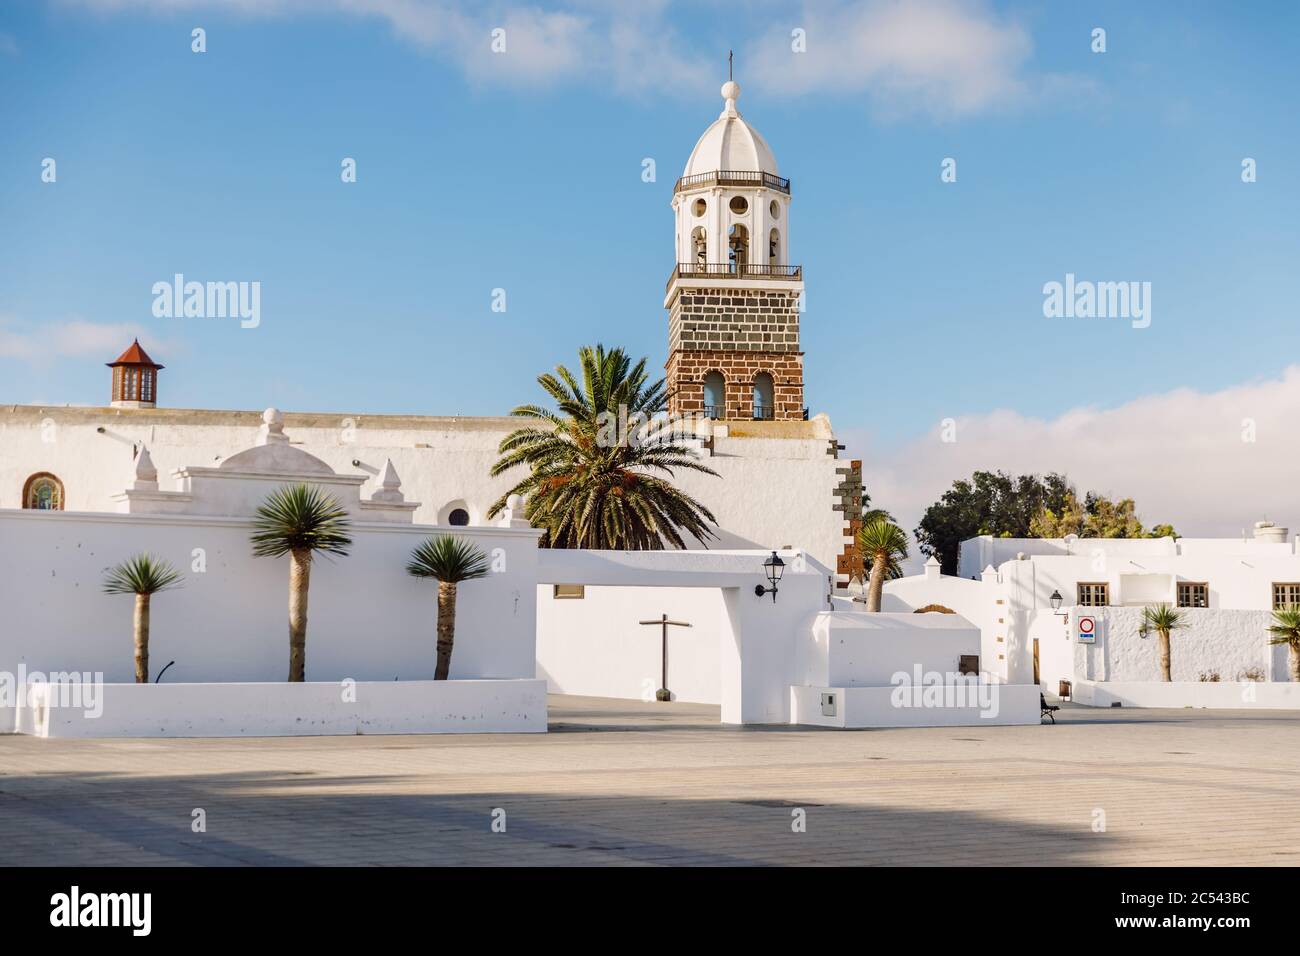 Lanzarote, Spain - April 04, 2020. The old architecture of city of Teguise. Church Iglesia de Nuestra Senora de Guadalupe and palms Stock Photo